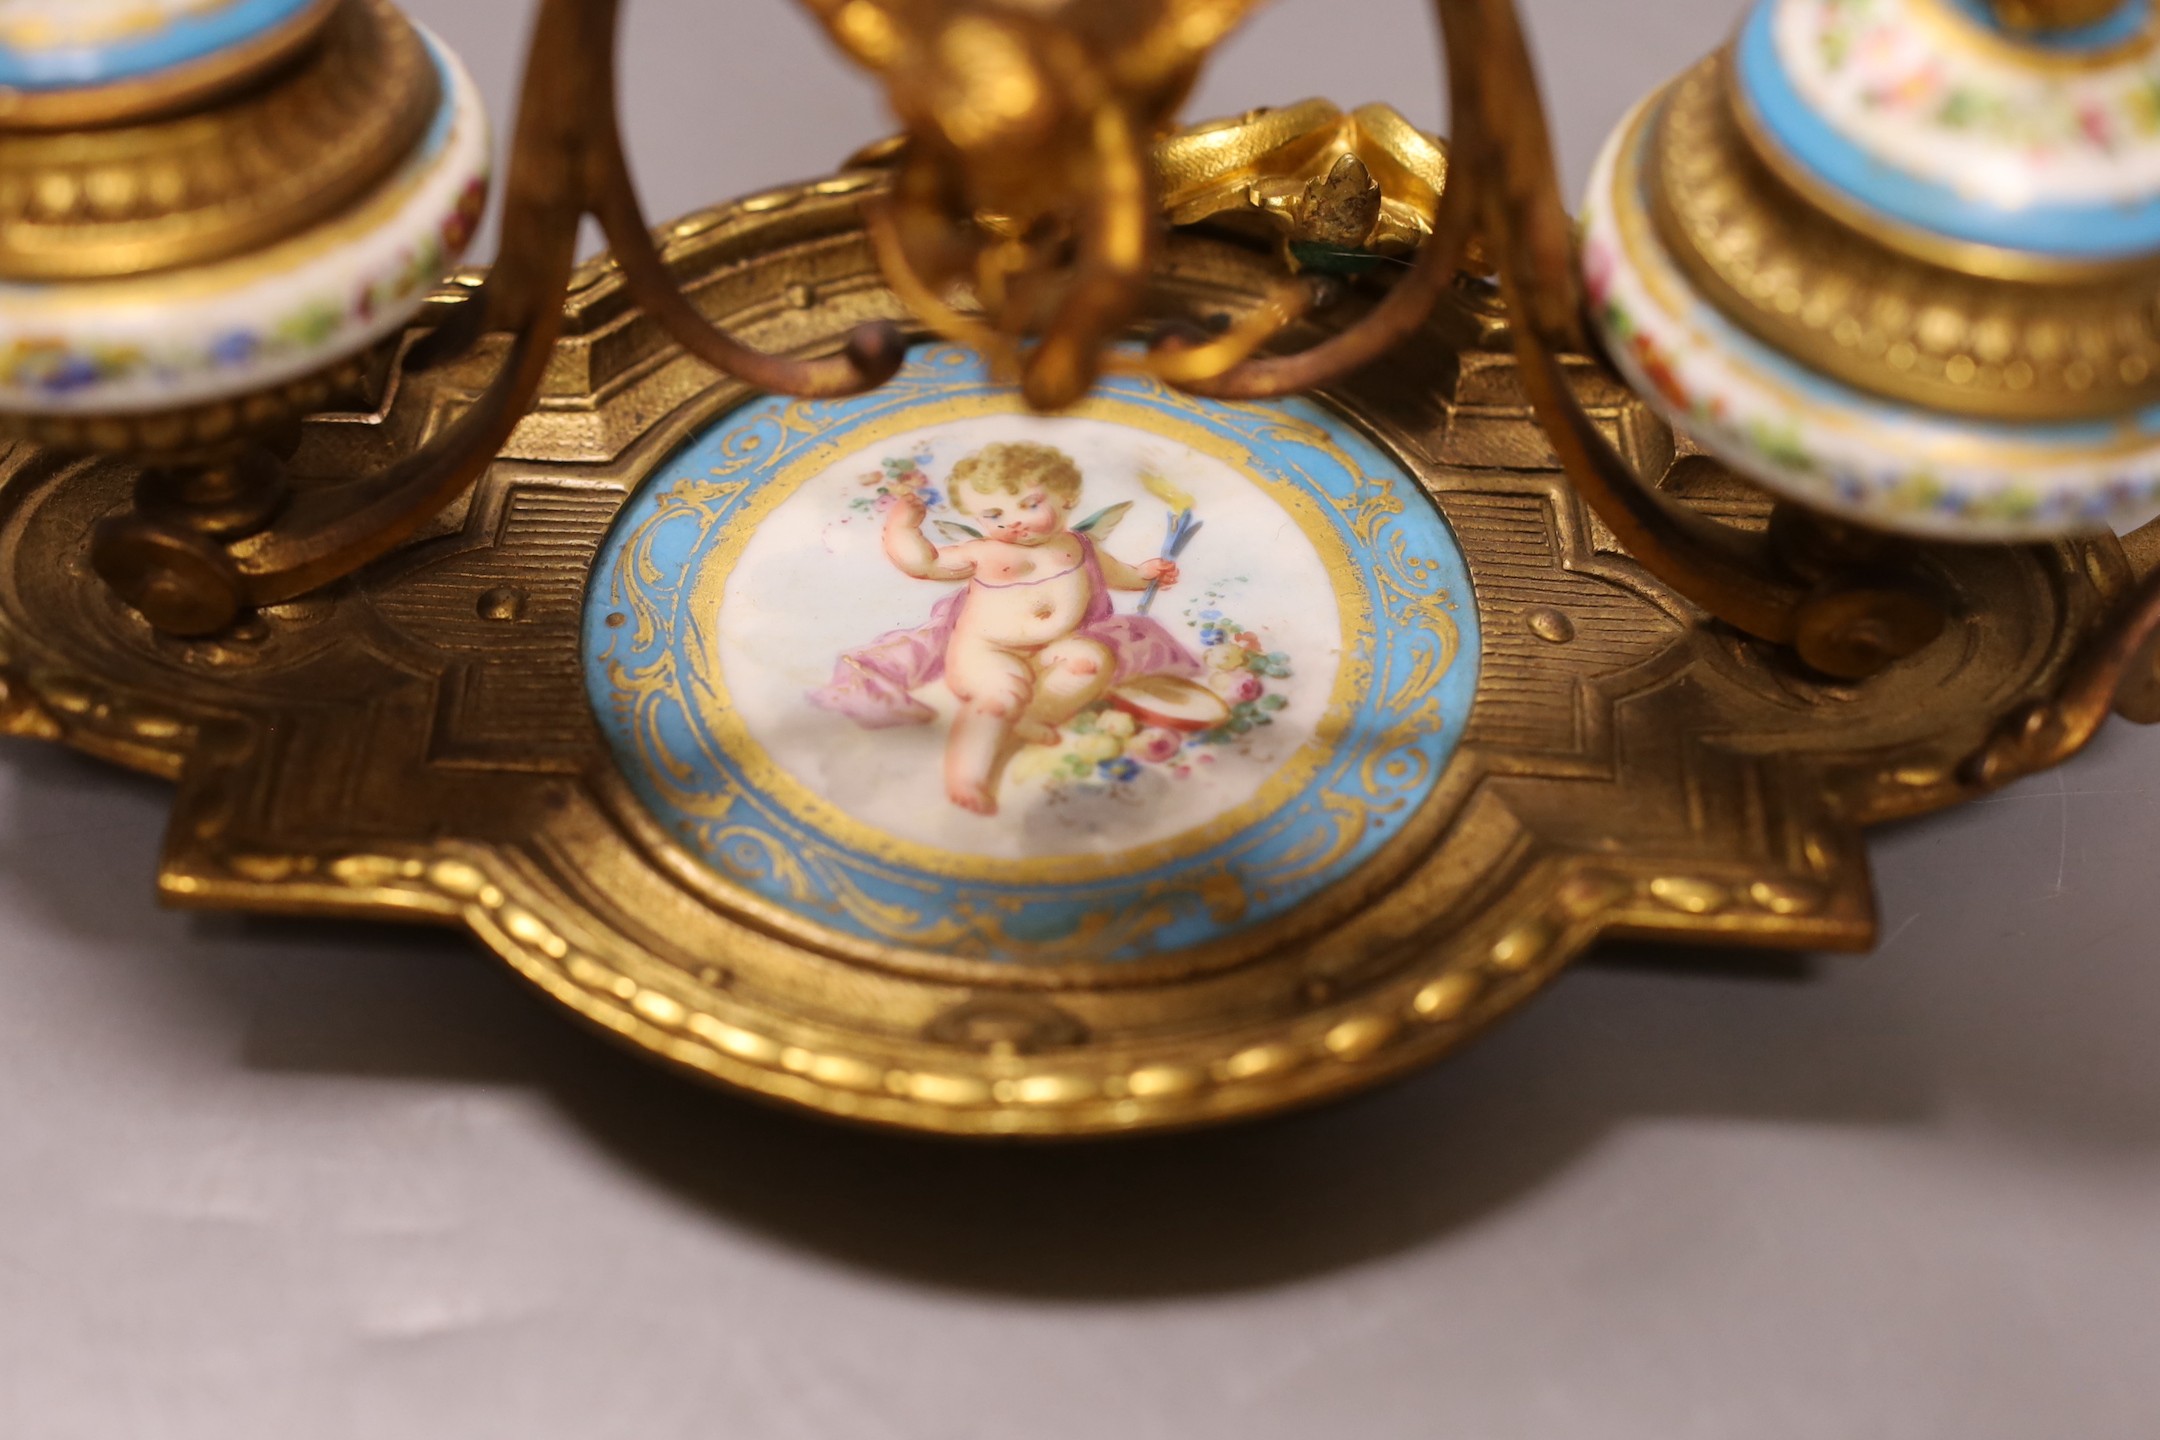 A late 19th century ormolu and 'Sevres' inkstand with cherub and floral decoration - 29cm long - Image 2 of 2